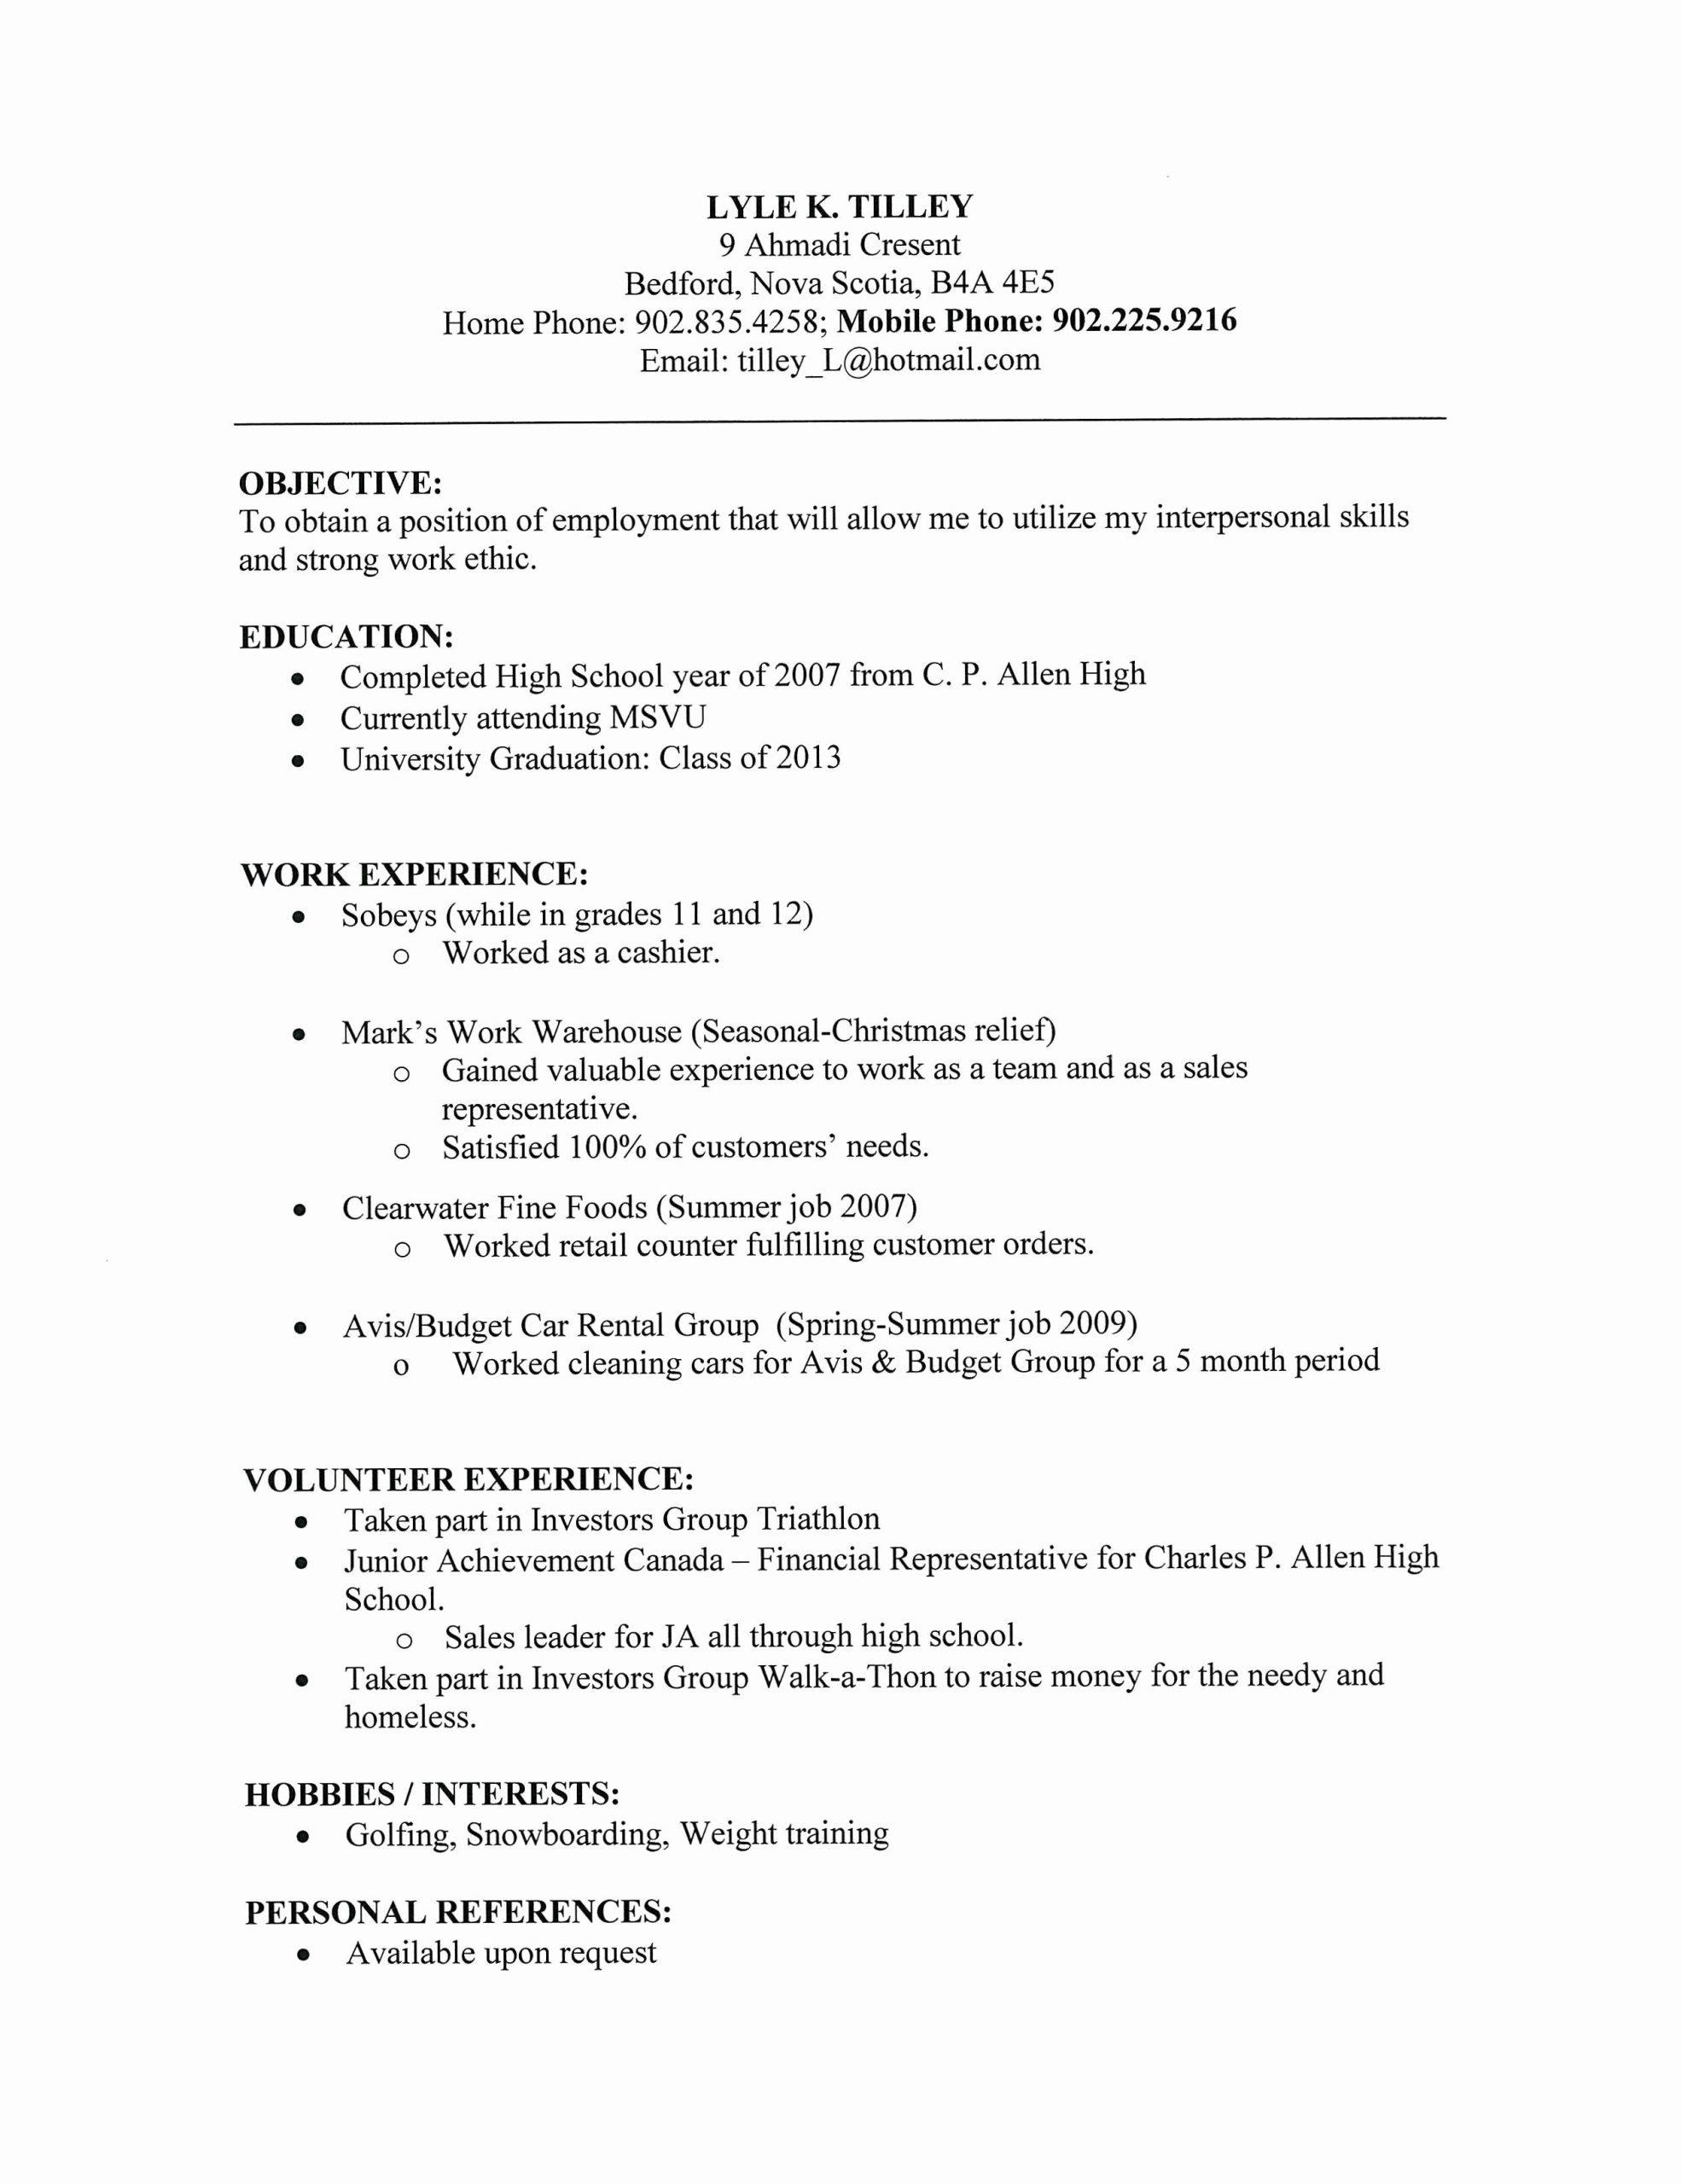 Sample Cover Letter For Cleaning Job With No Experience